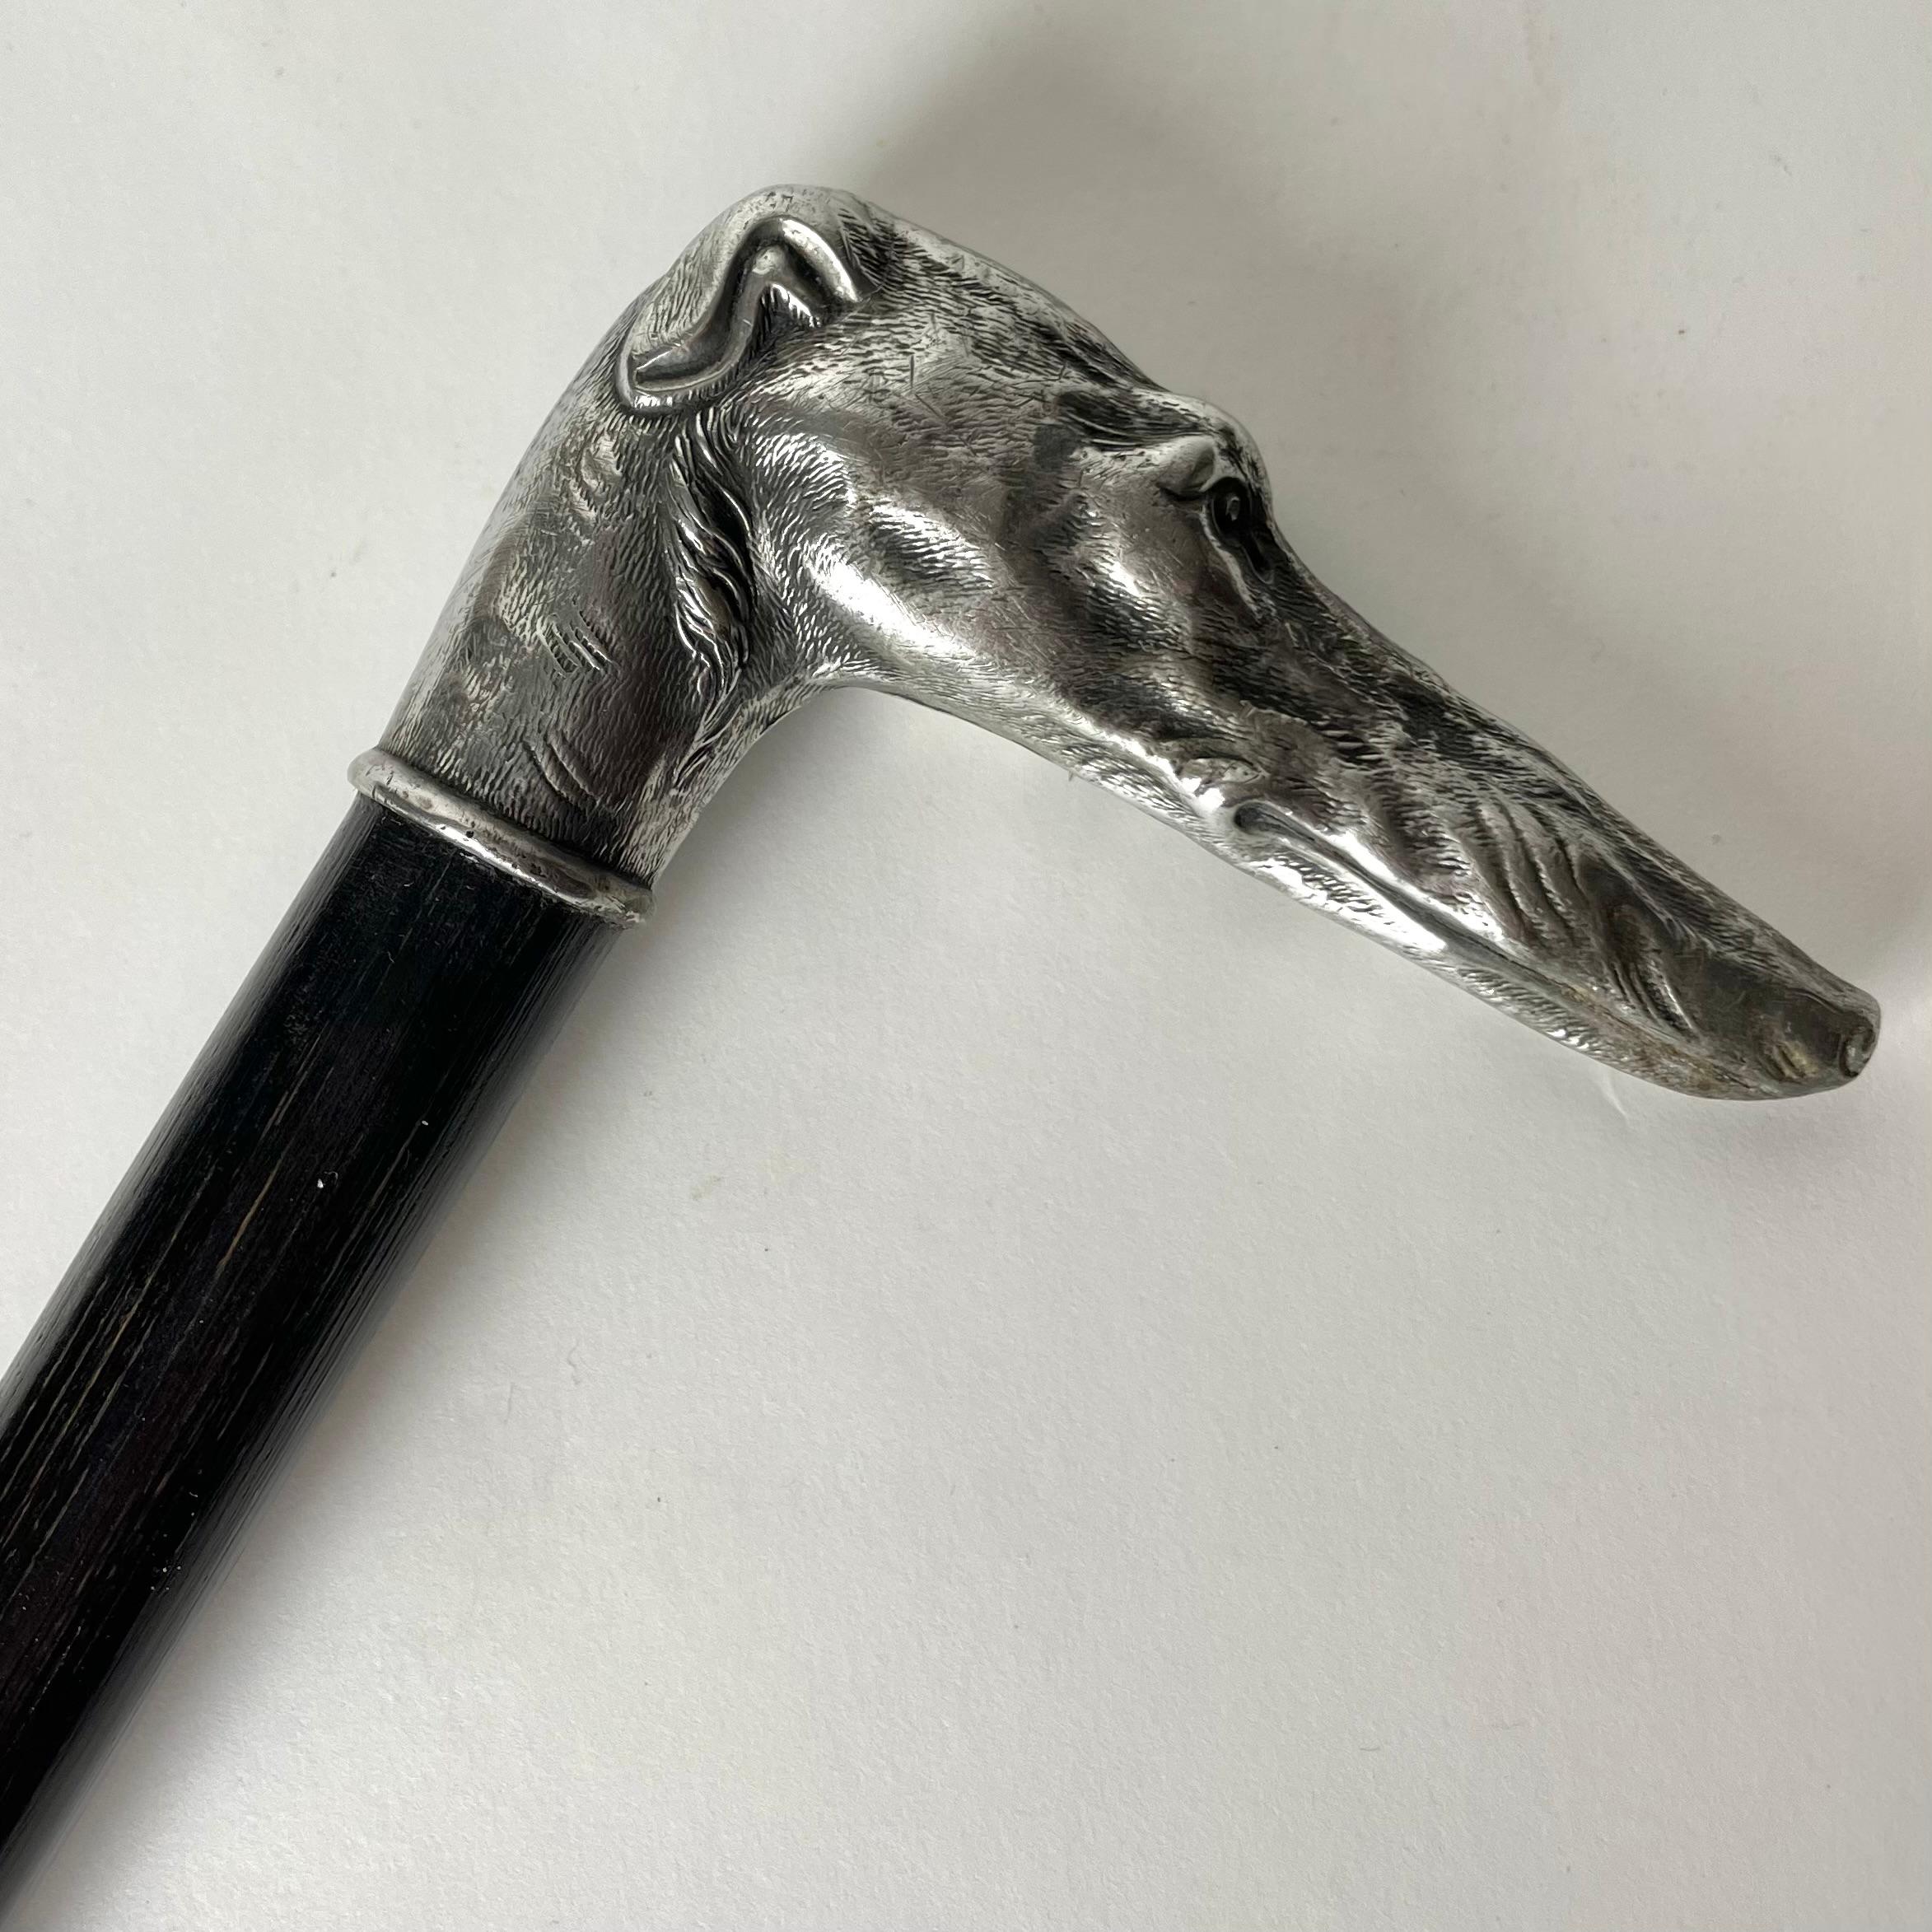 
A charming walking cane/stick from the late 19th century with a Greyhound head handle. The stick is wooden and with a white metal handle.

Wear consistent with age and use.